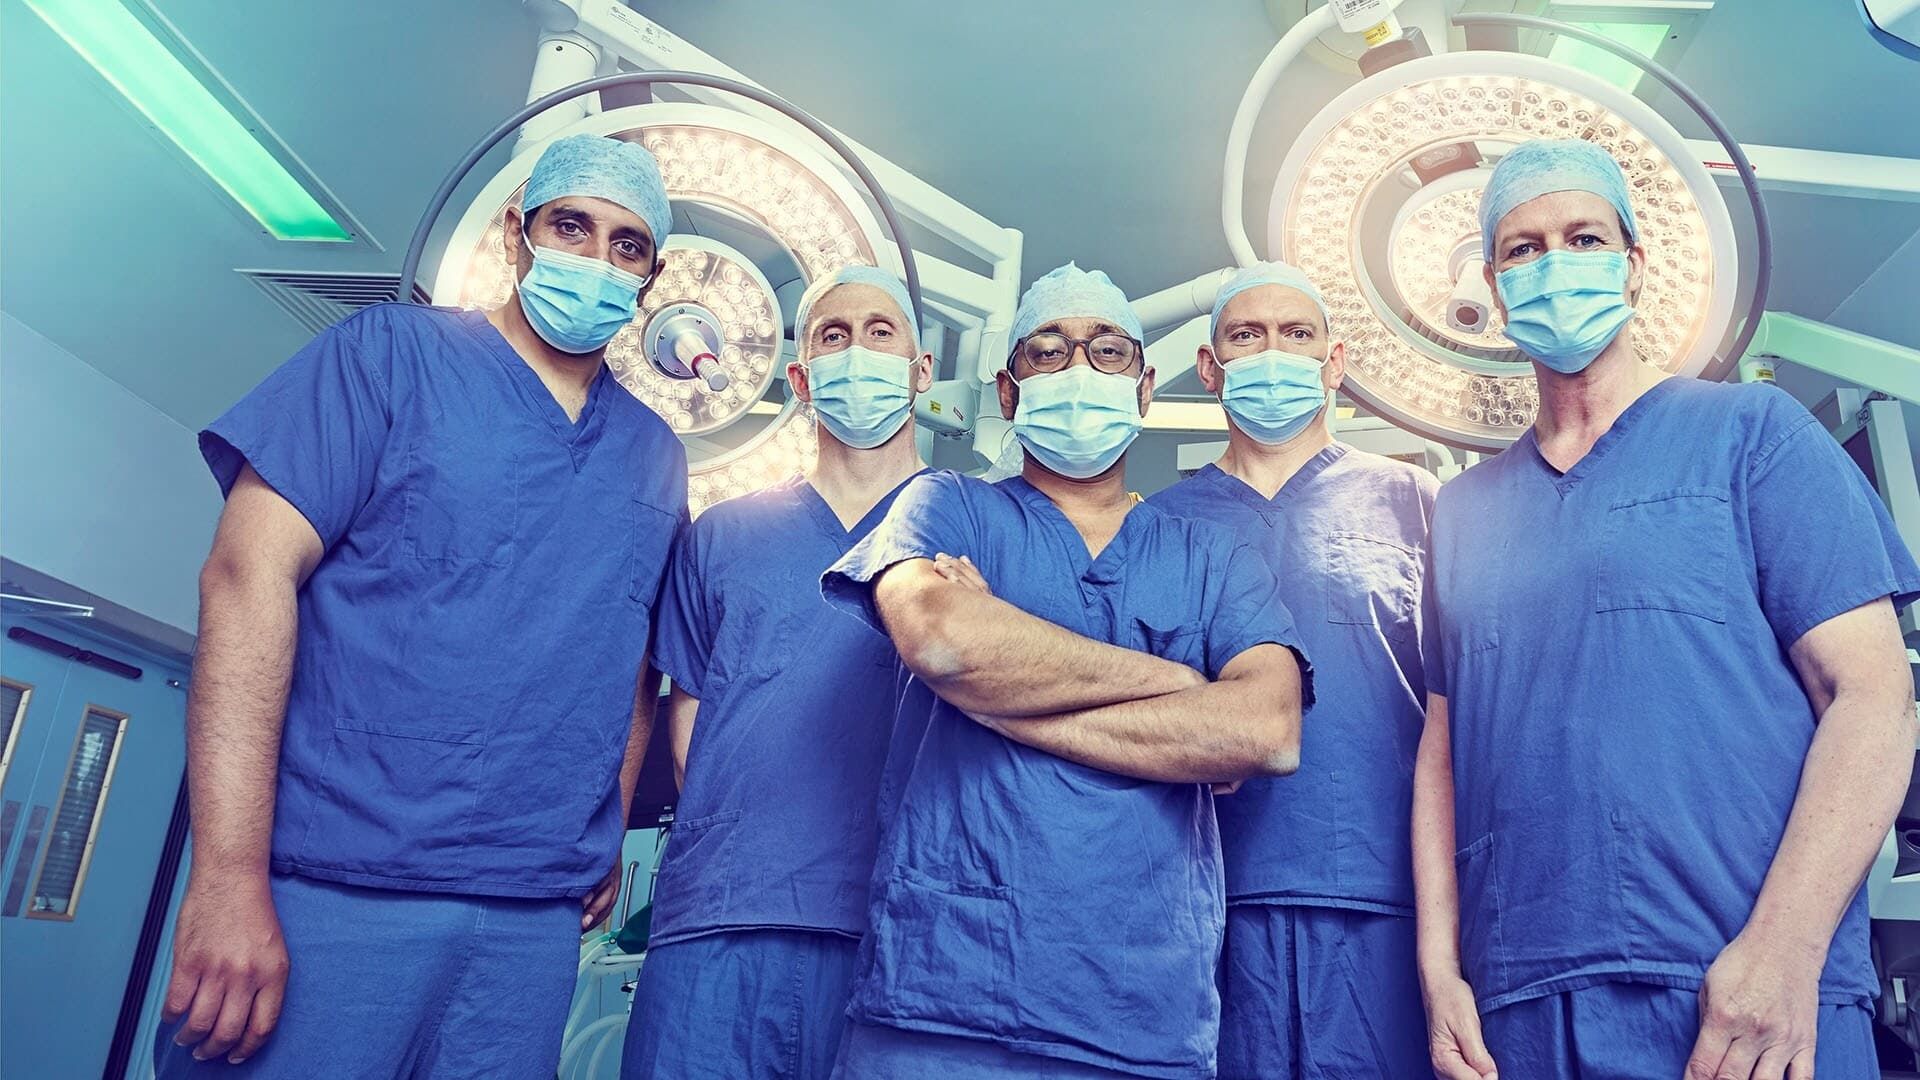 Super Surgeons: A Chance at Life background